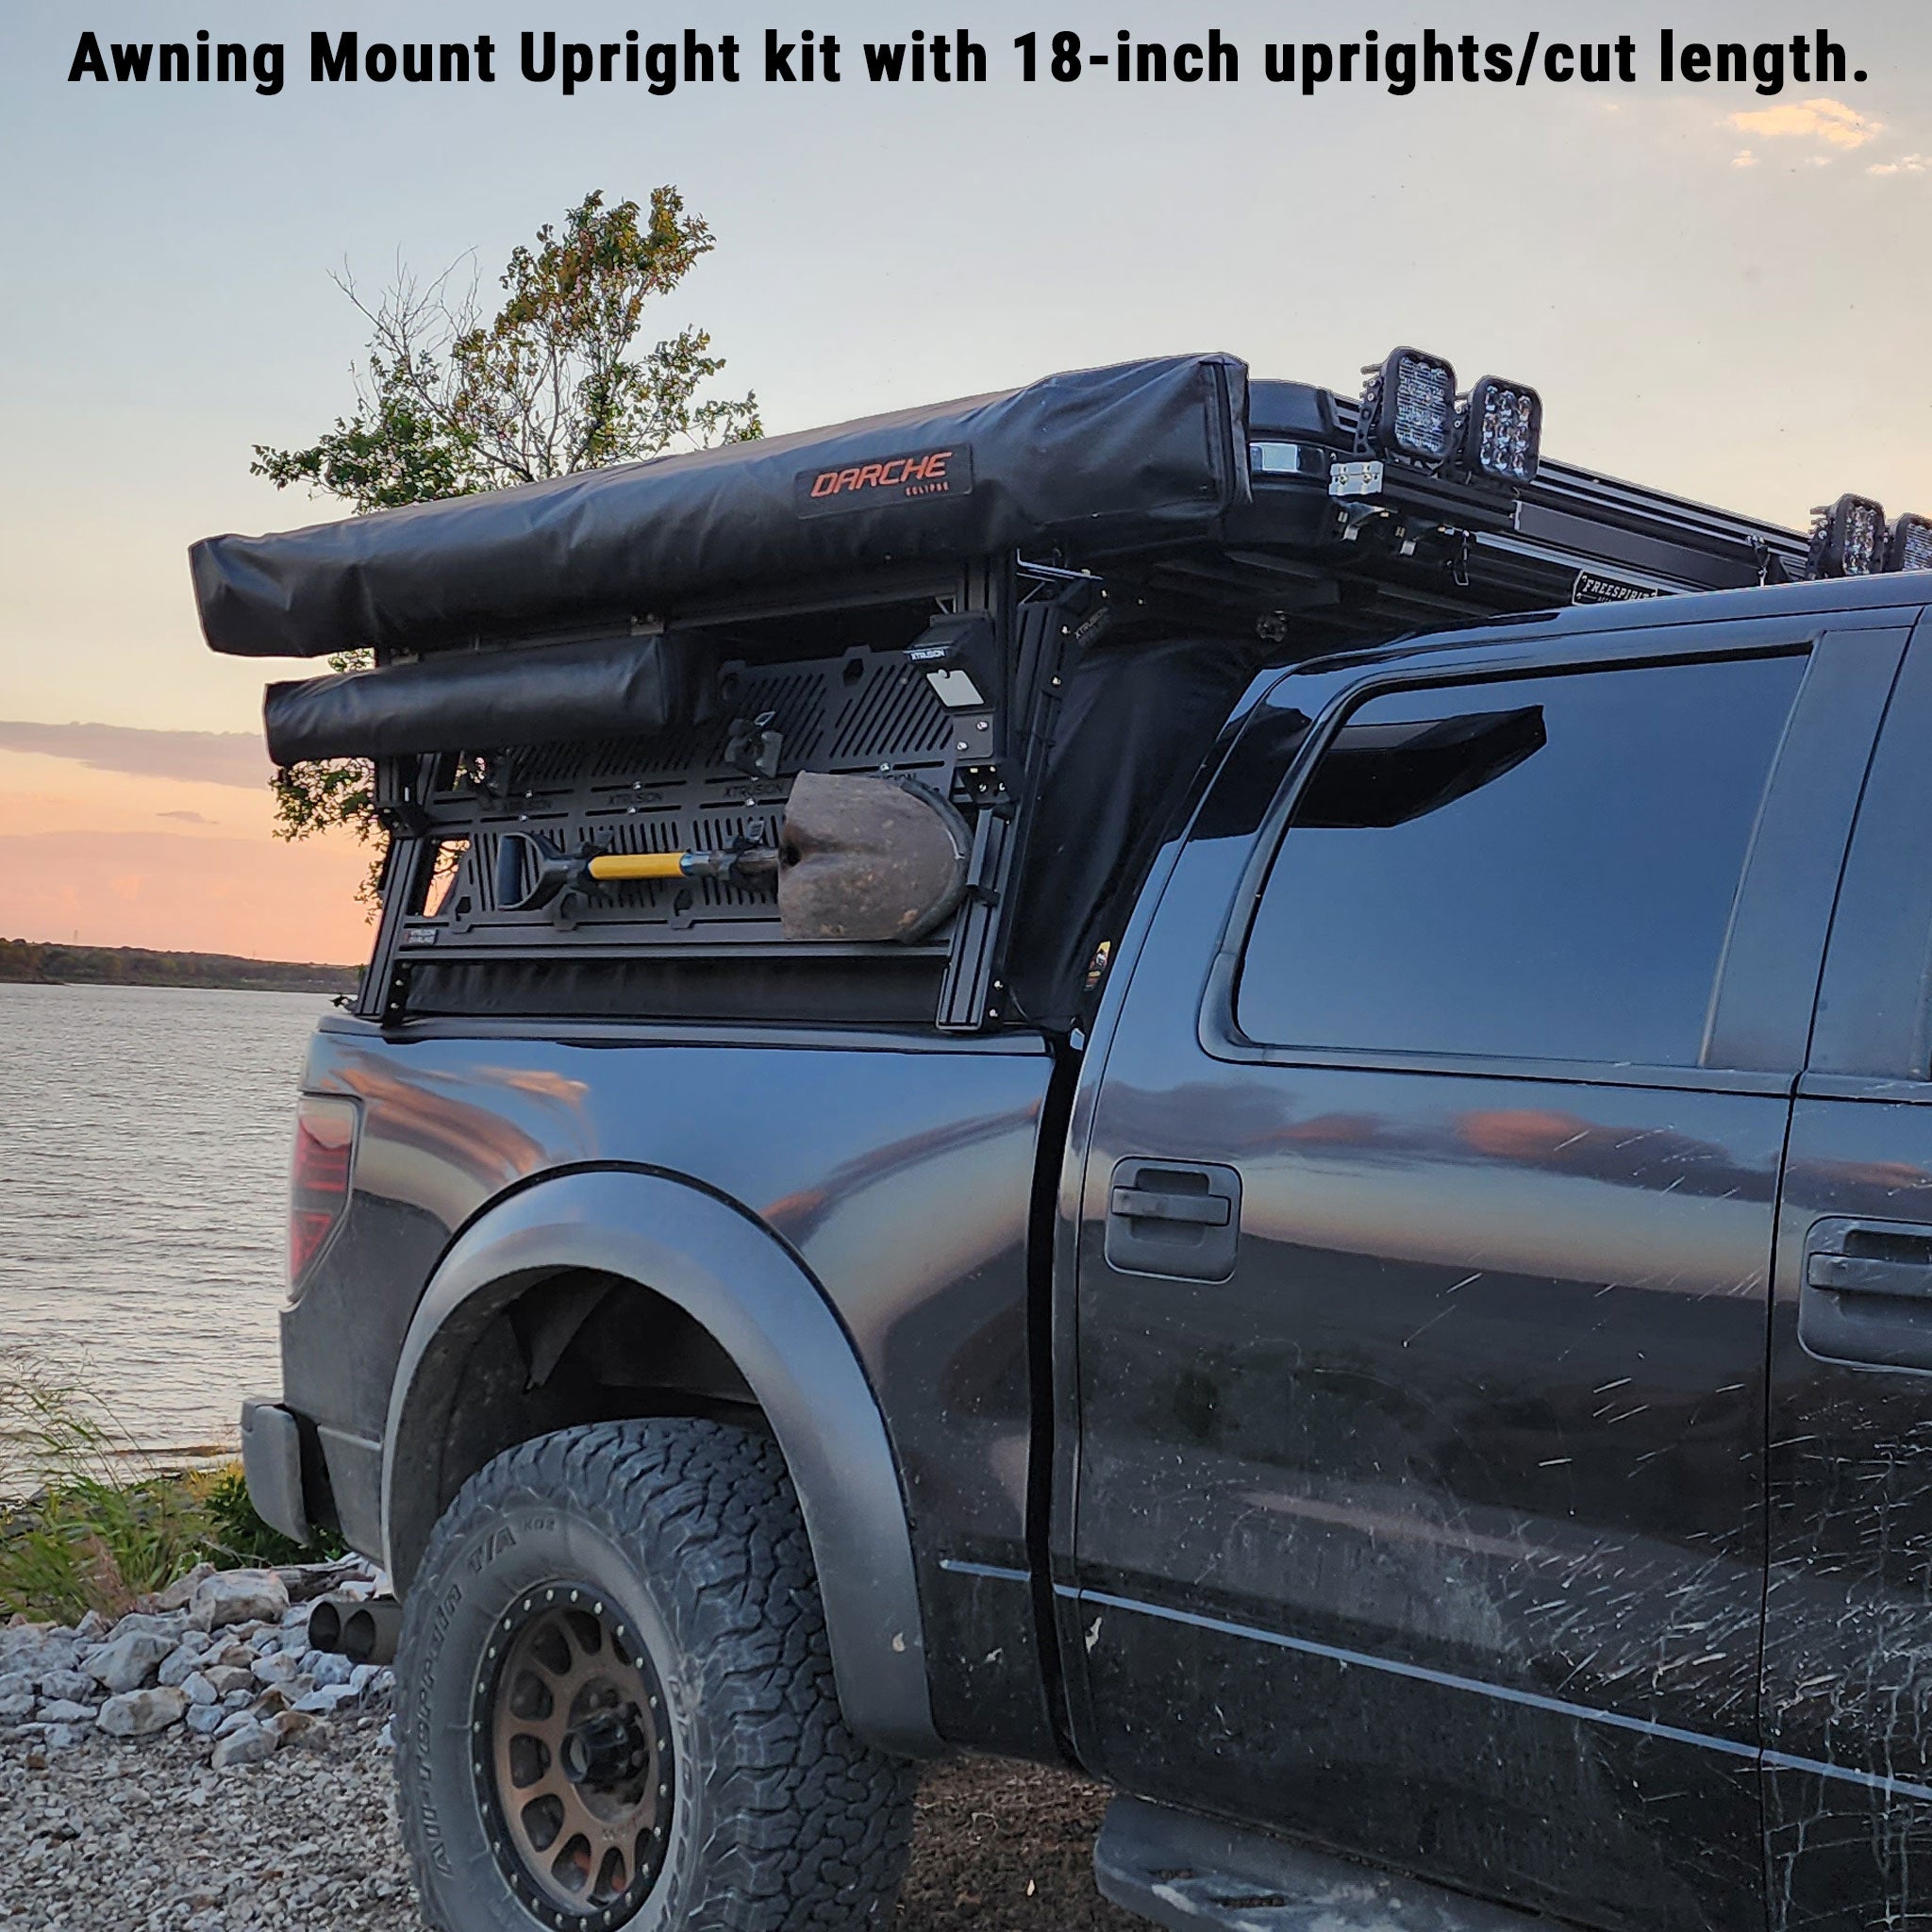 Awning Upright Sub-structure kit with 18-inch uprights, 270 Awning attached and on a full size truck with  13.3 degree angle XTR1 bed rack loaded with molle panels, shower tent, shovel, and lights.